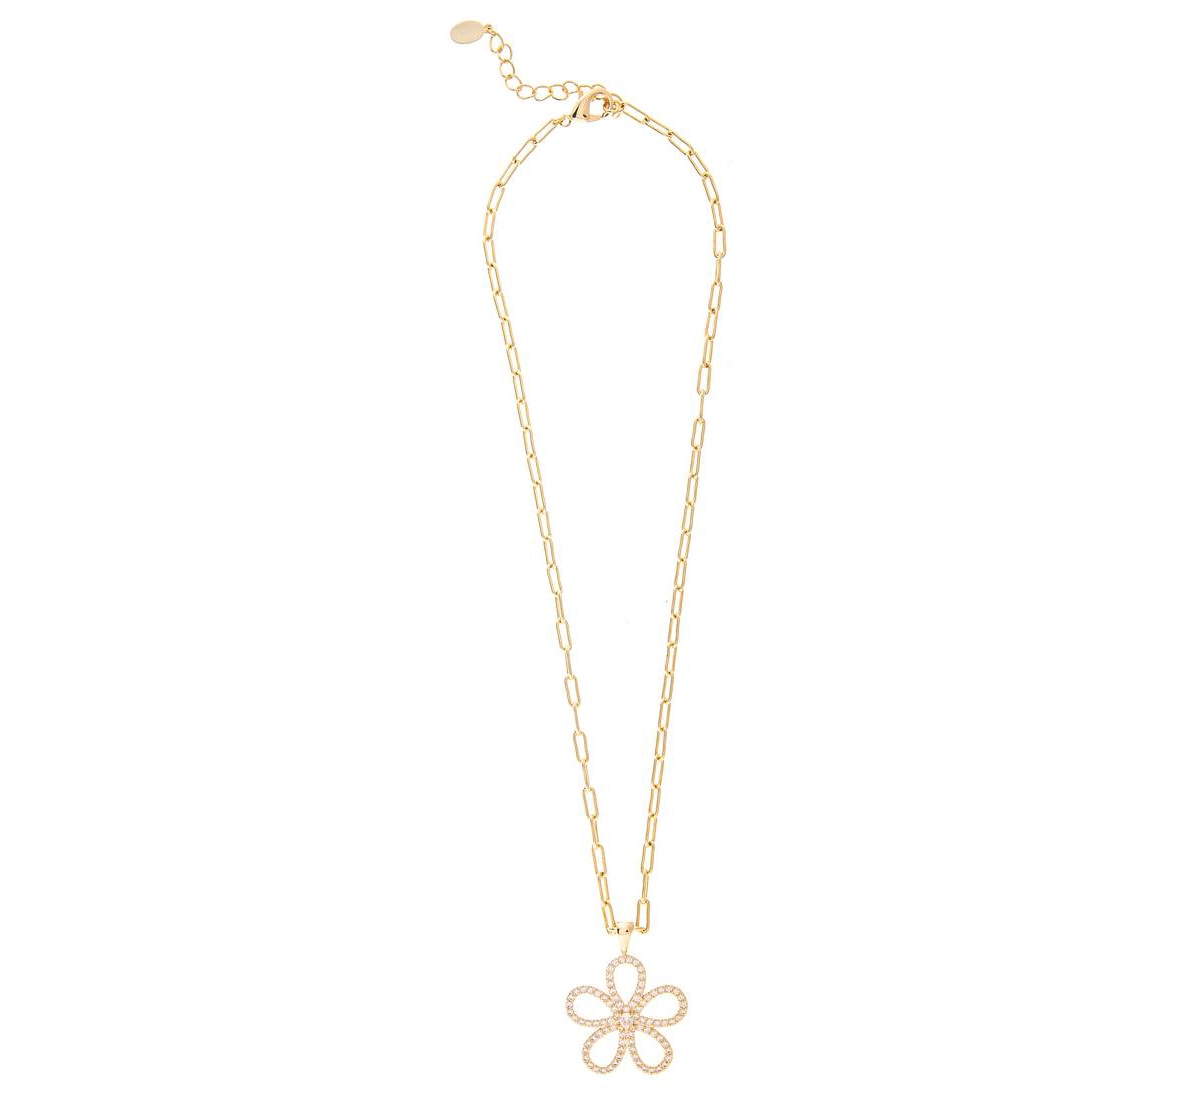 Cubic Zirconia Flower Pendant Necklace - Gold with clear cubic zirconia